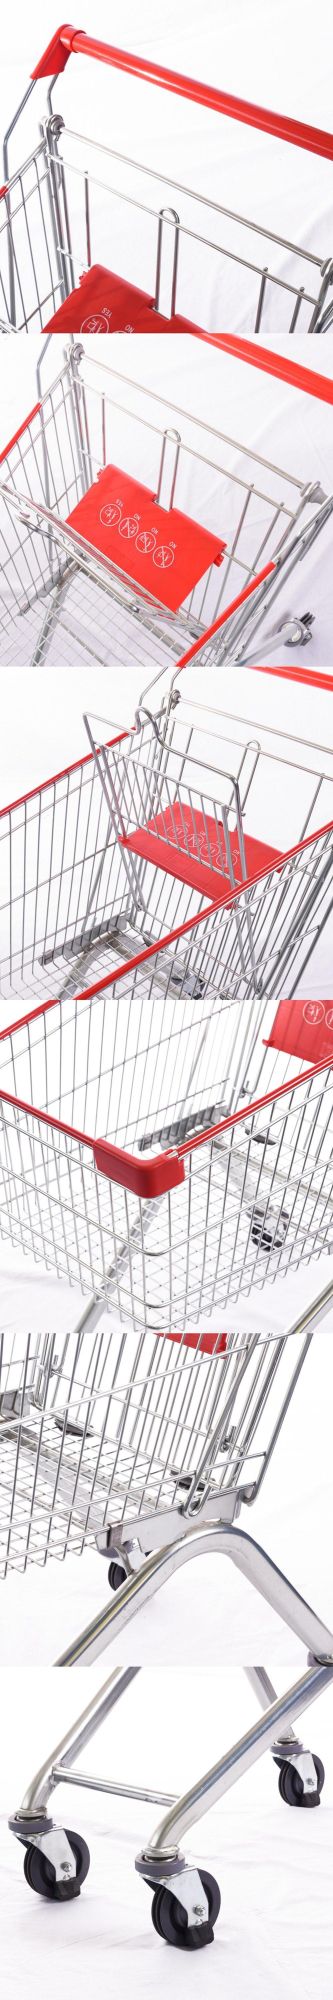 Cheap Hot Selling Metal Supermarket Cart Shopping Trolley with Wheels